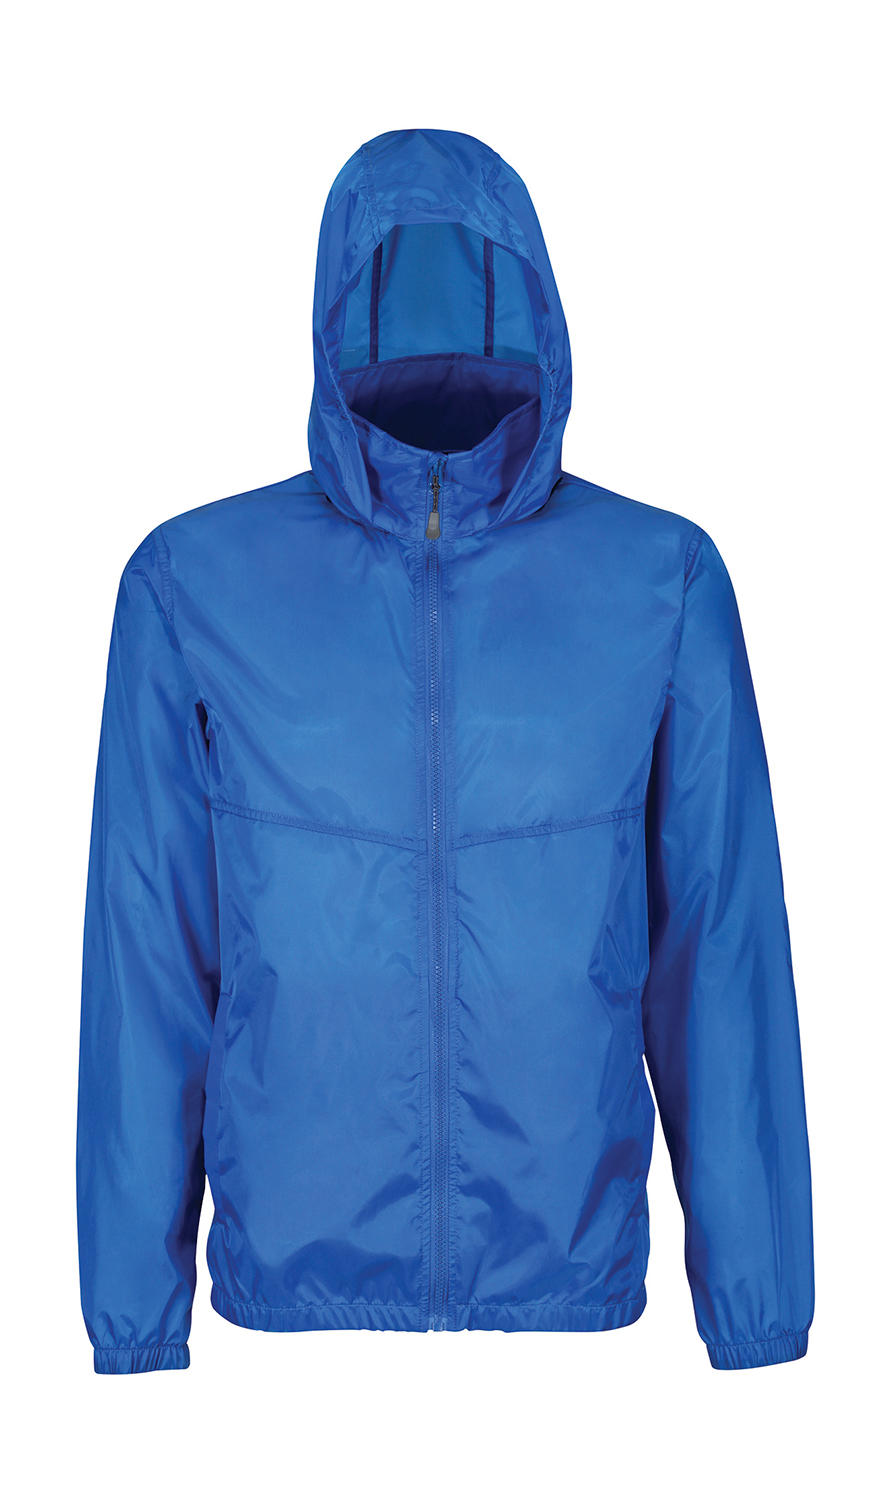  Asset Lightweight Jacket in Farbe Oxford Blue